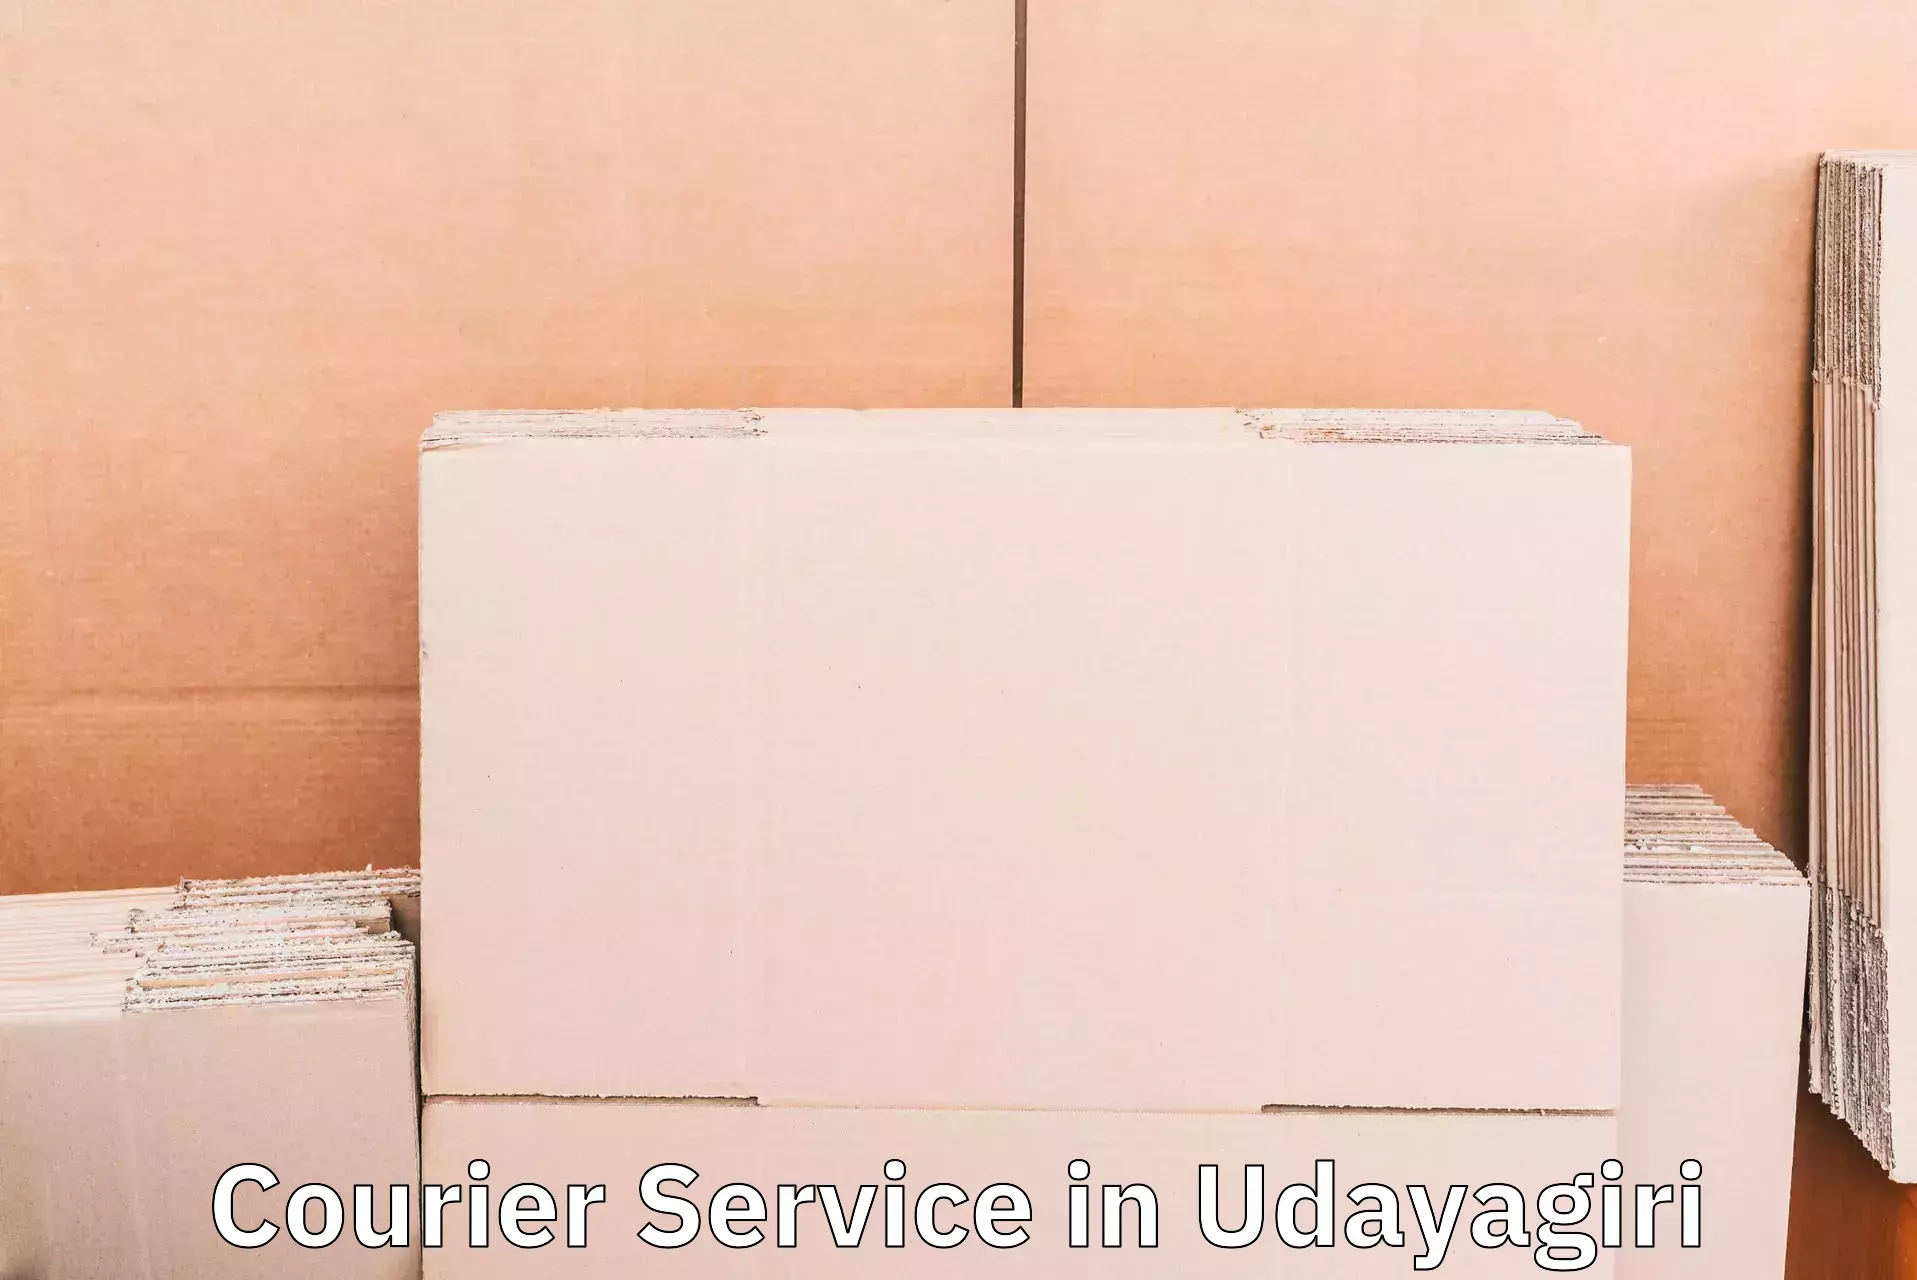 On-demand delivery in Udayagiri